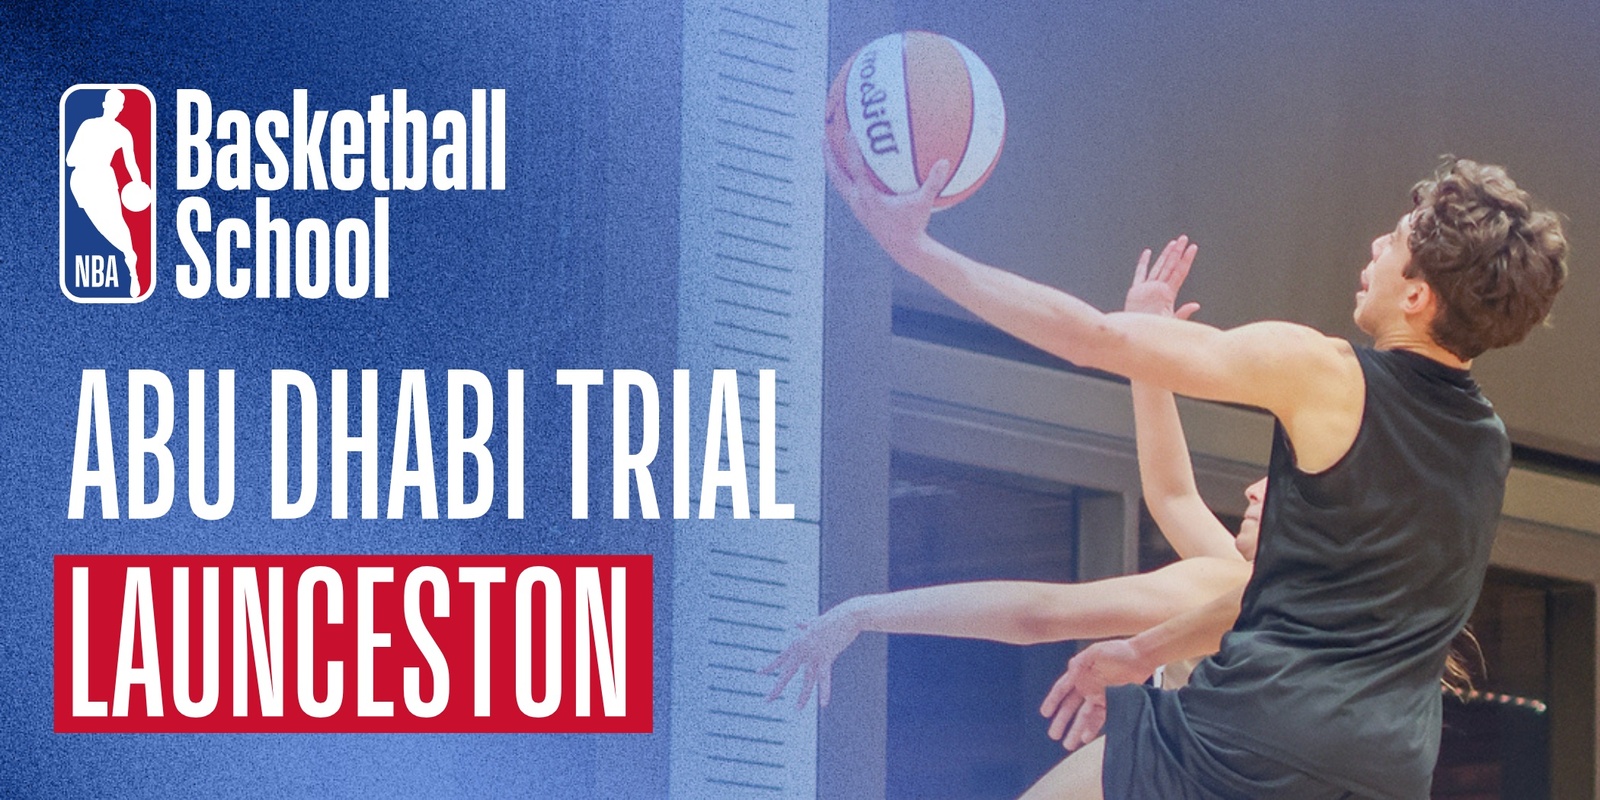 Banner image for Launceston Trial for Abu Dhabi Tournament hosted by NBA Basketball School Australia